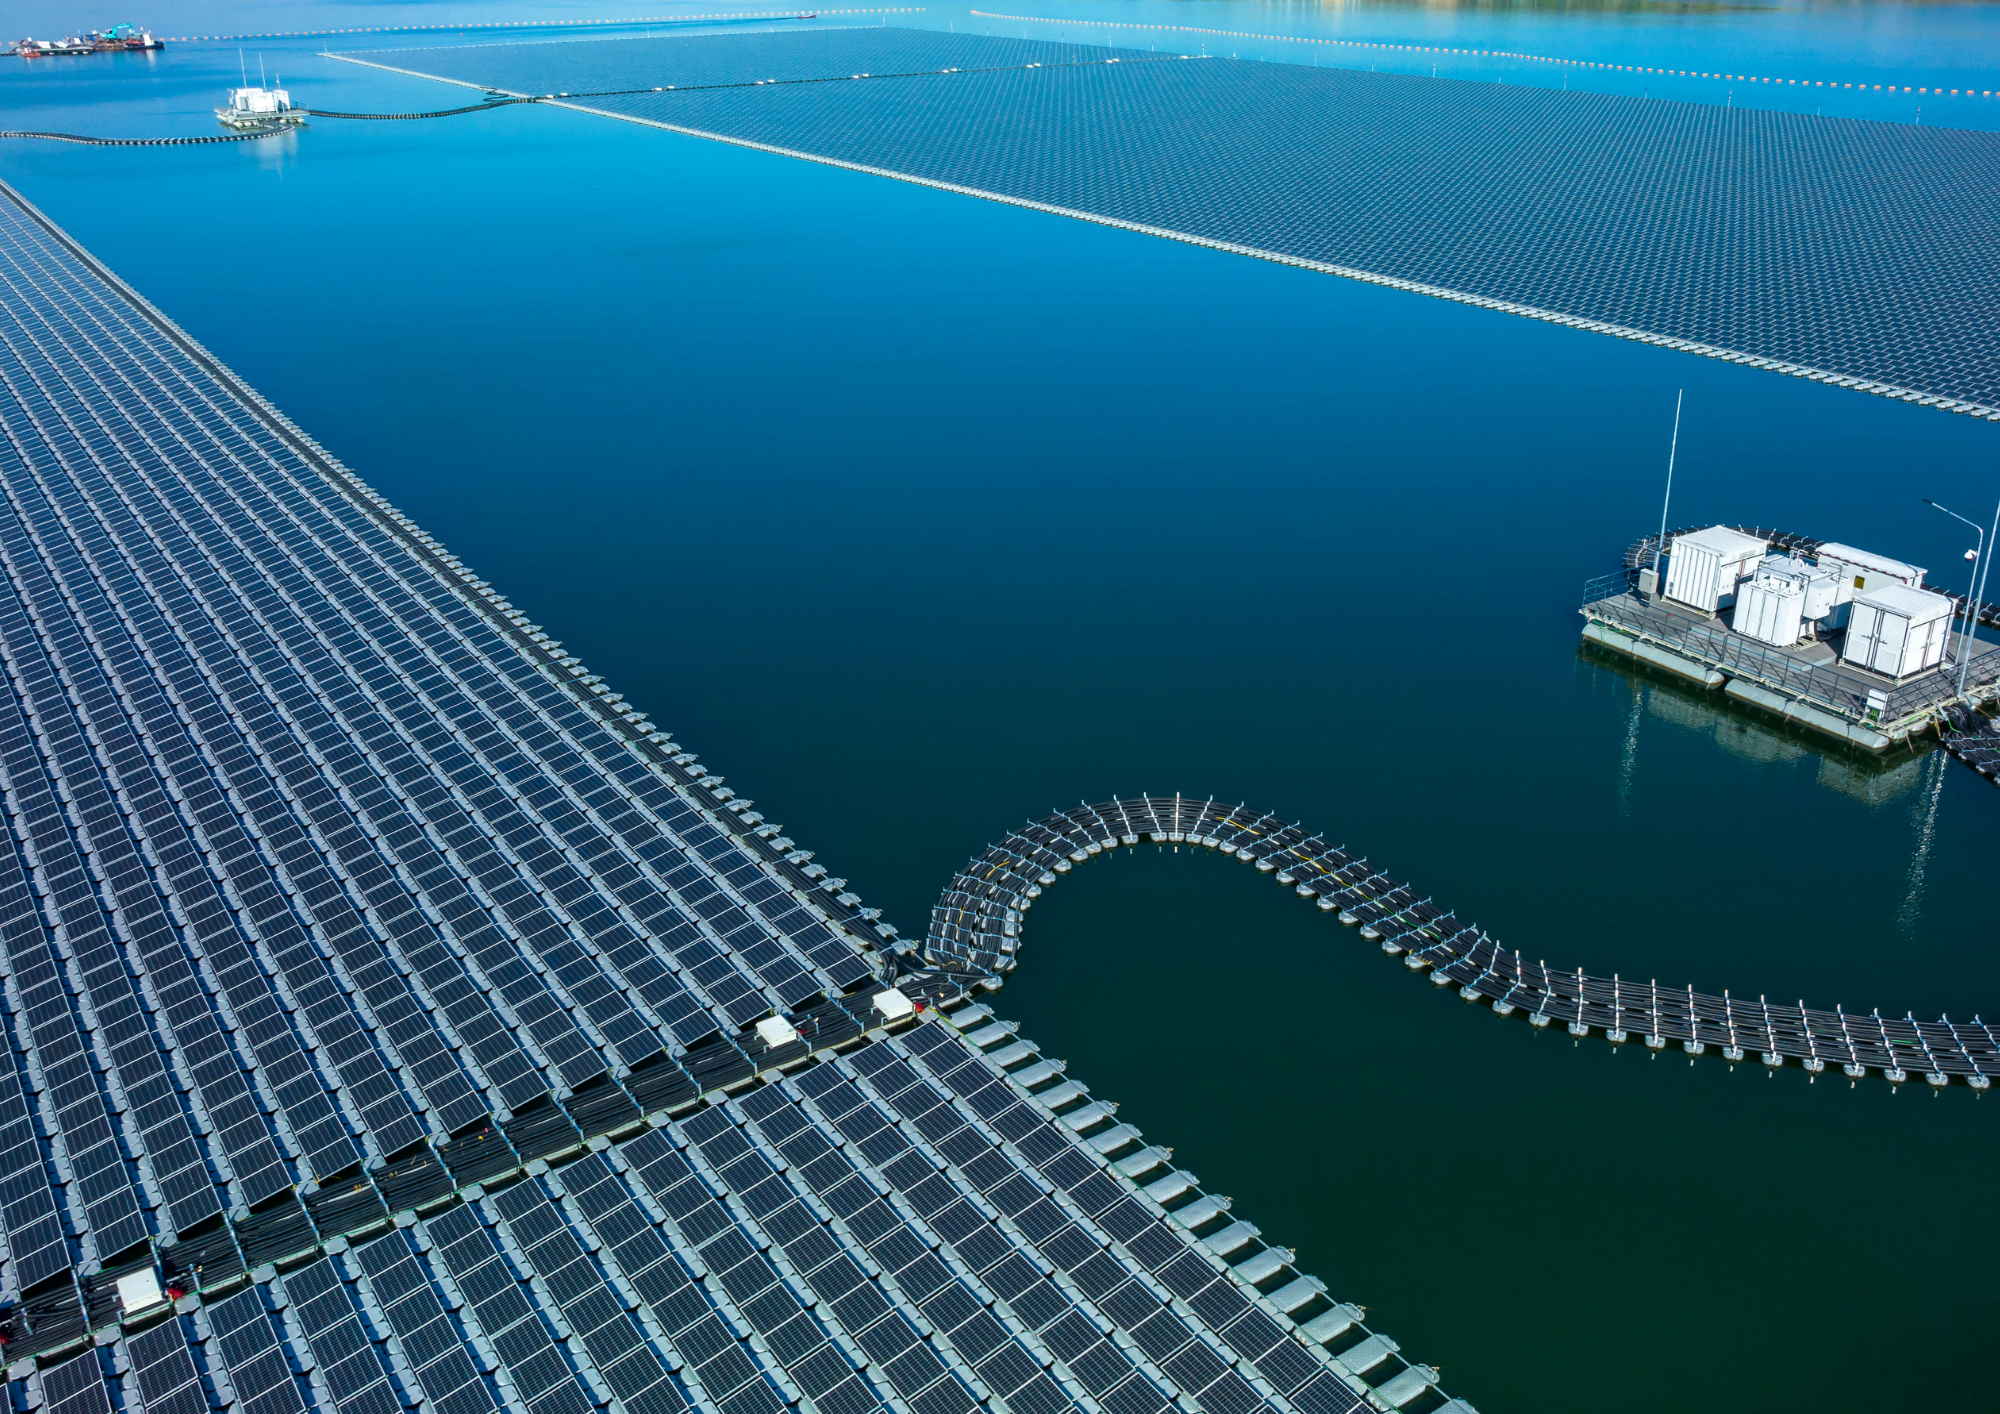 Imagine a world where communities can access limitless electricity by expanding solar generation potential to the water